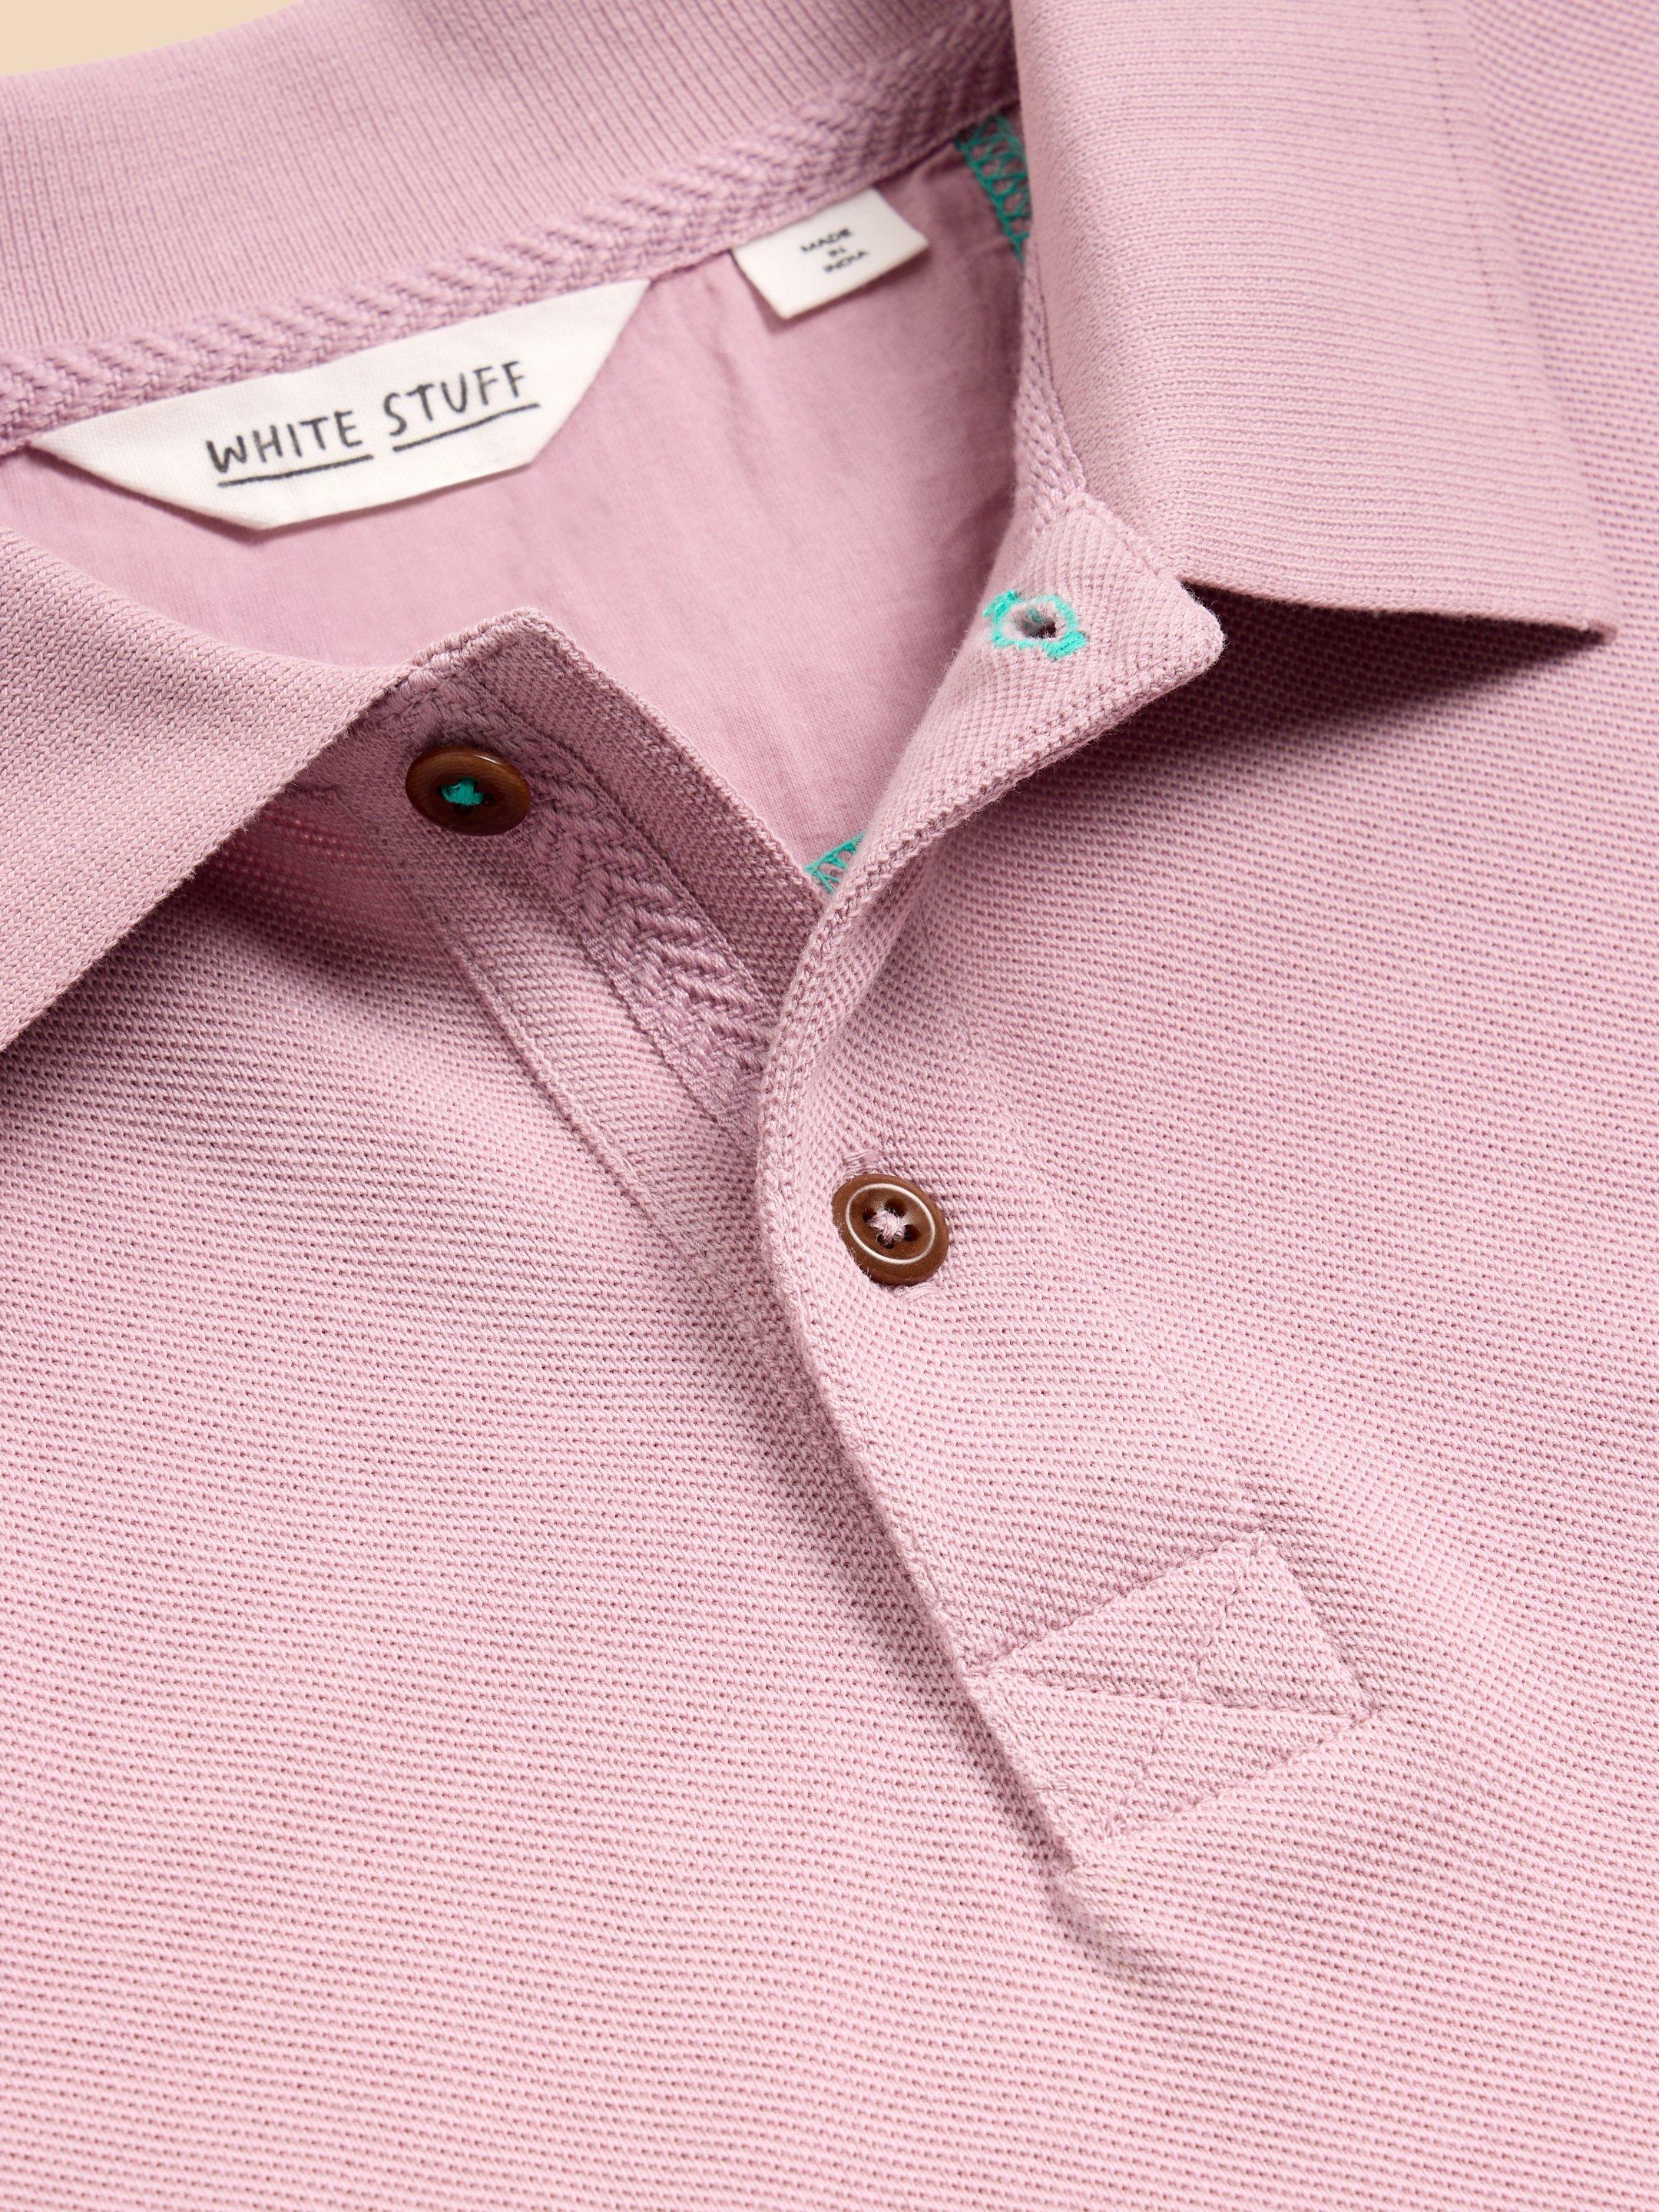 Utility Polo in LGT PURPLE - FLAT DETAIL